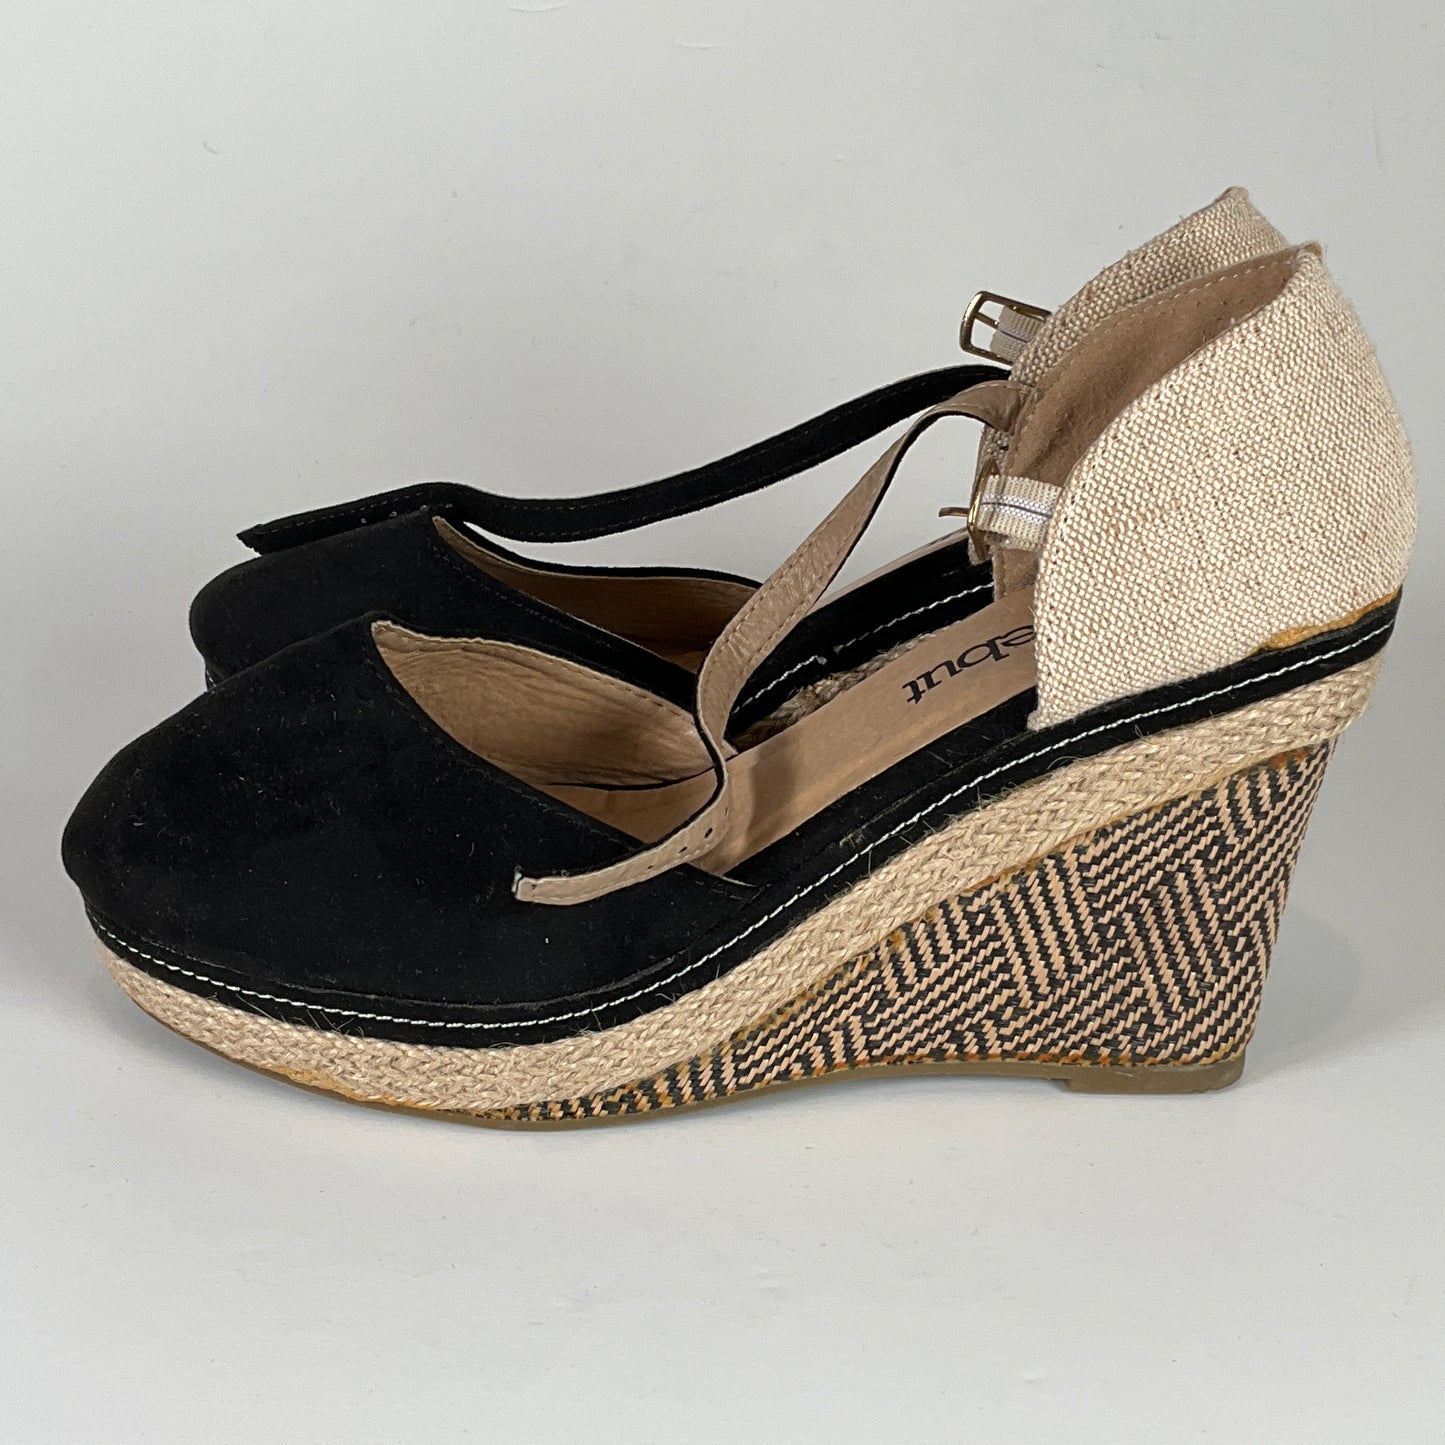 Debut - Wedges - Size 8